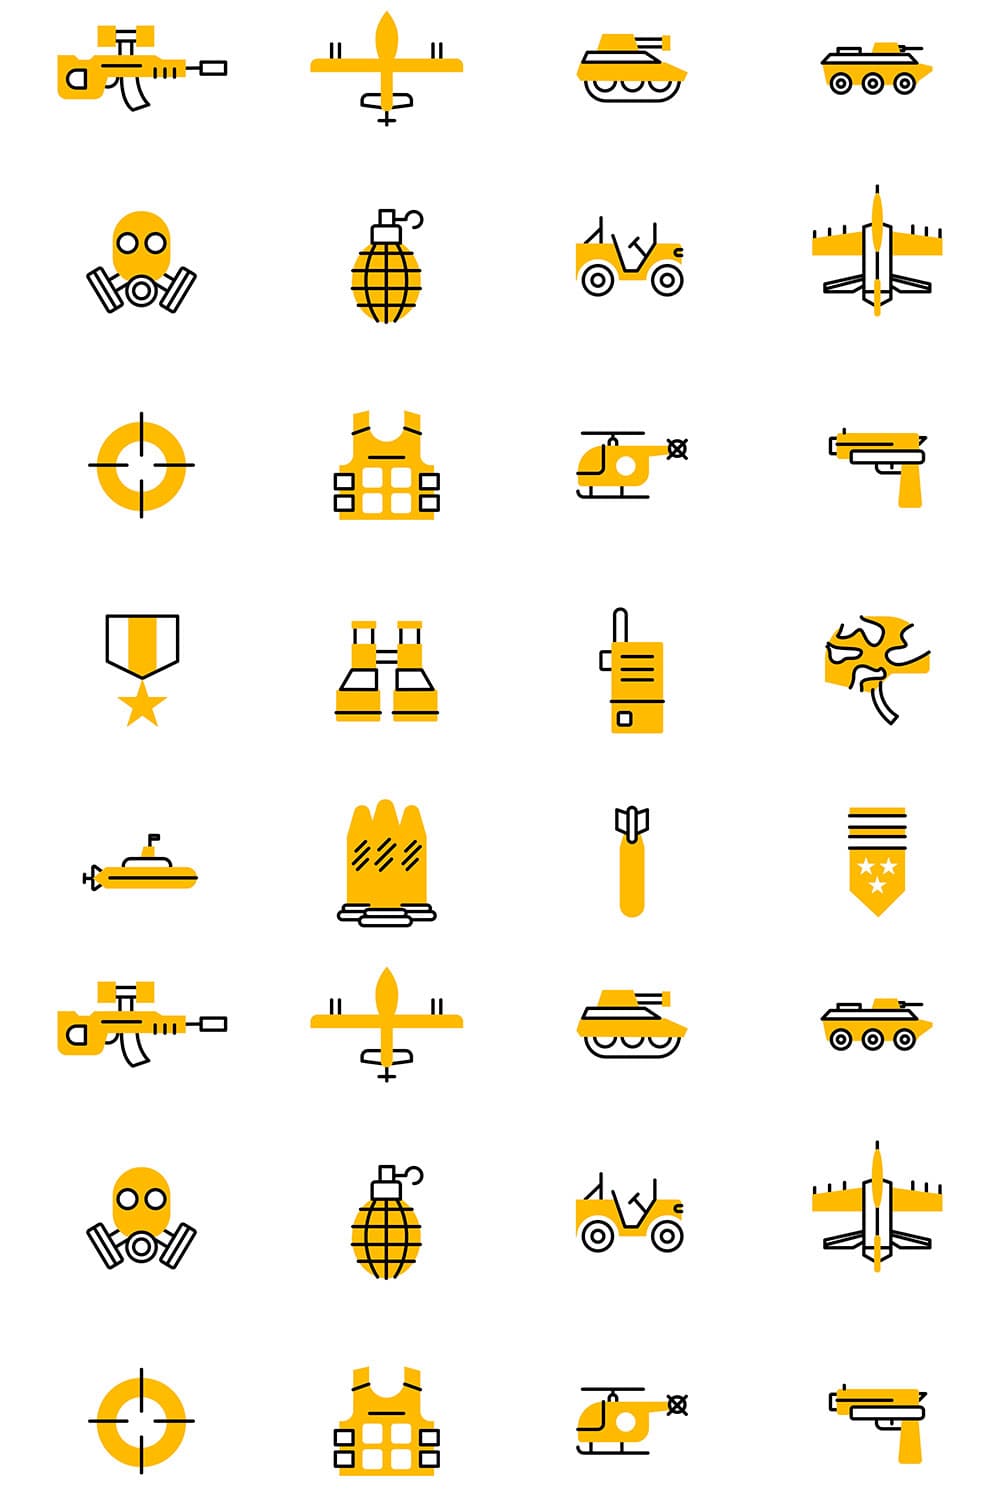 20 army military icons set, picture for pinterest.